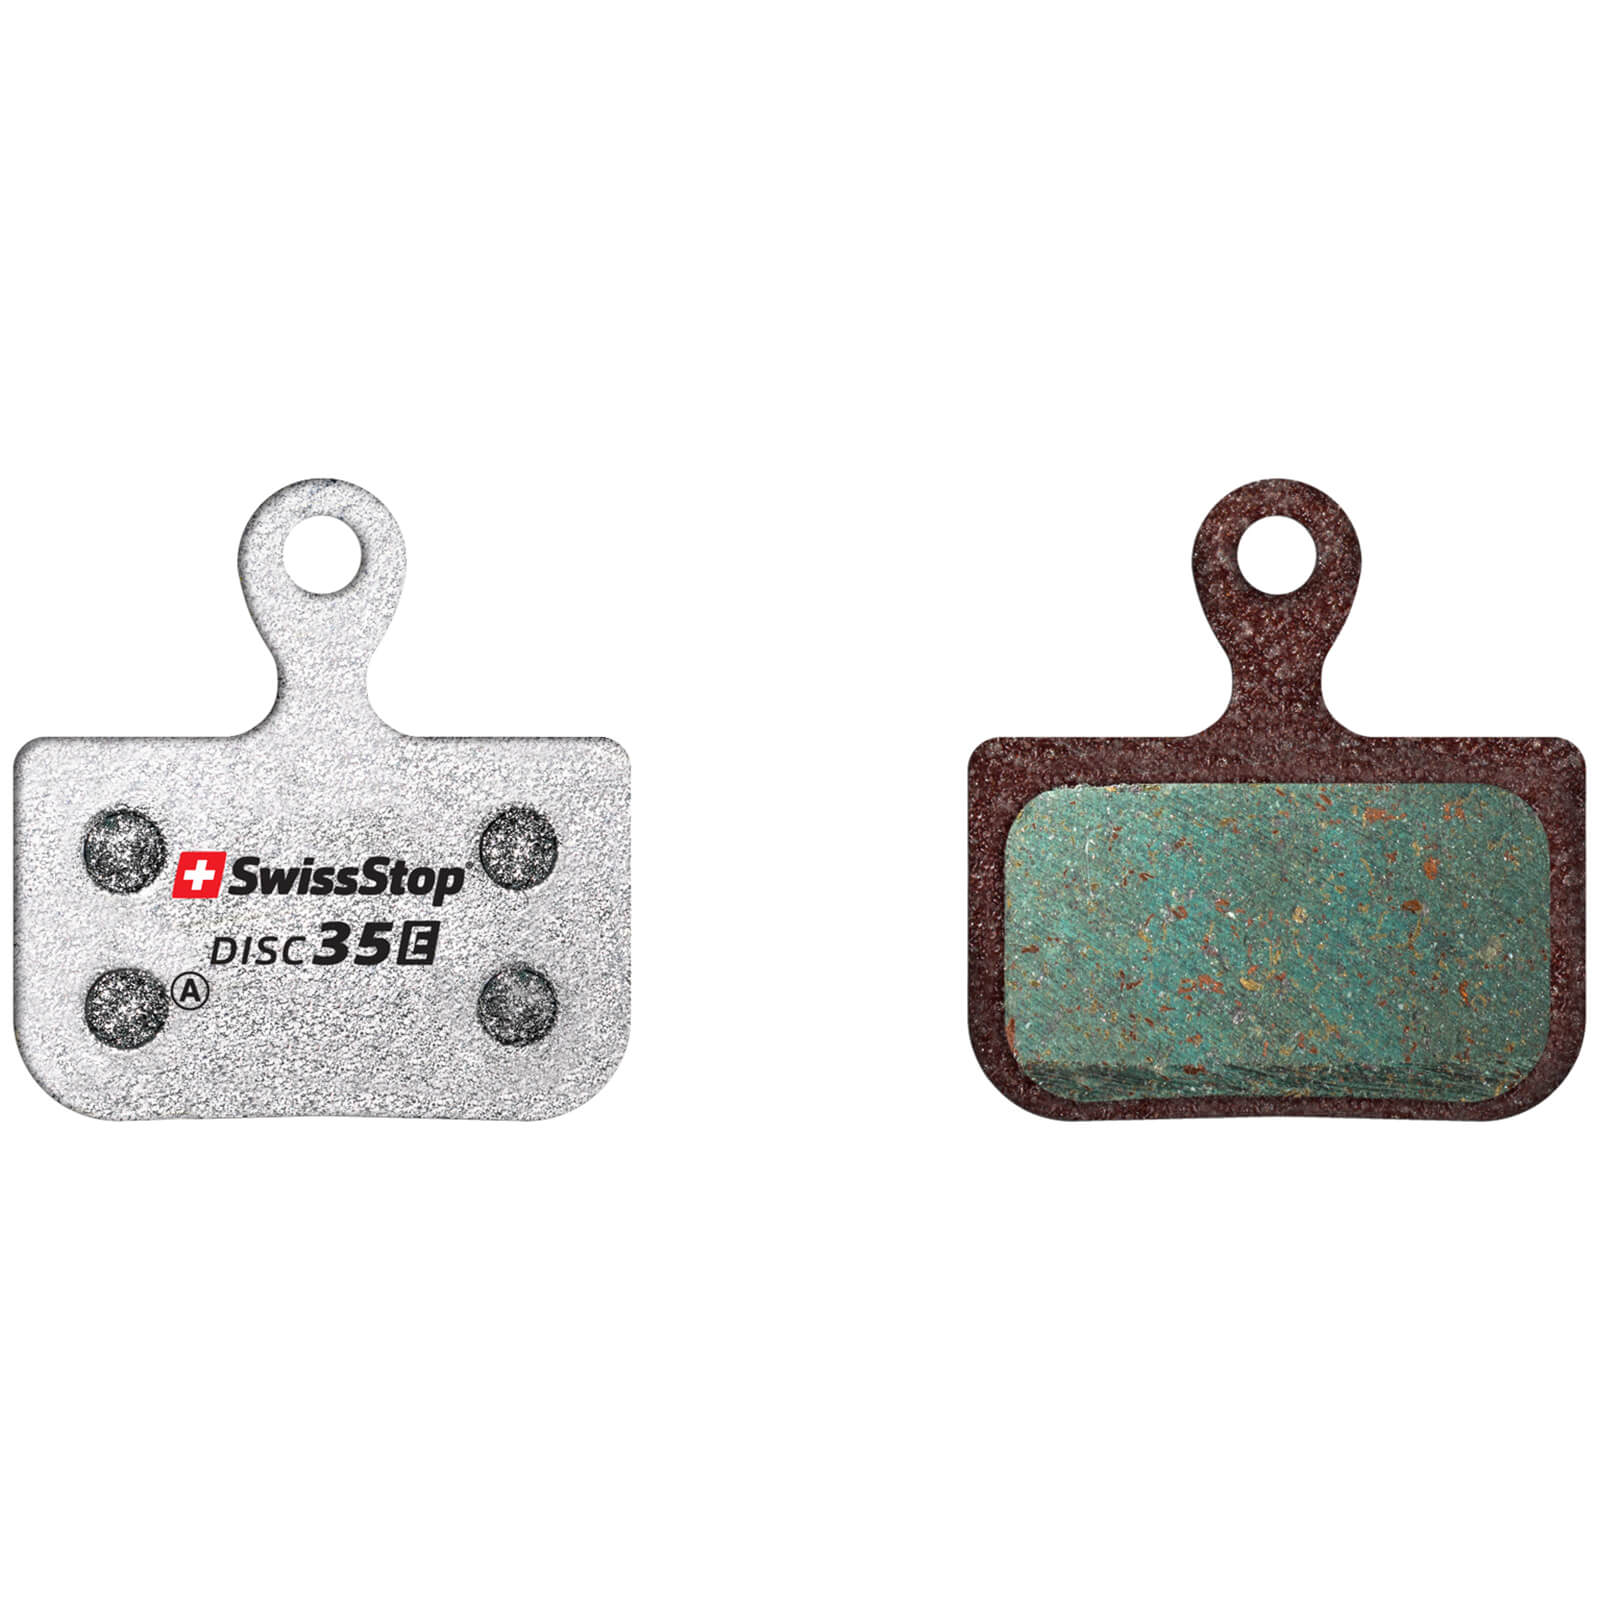 Image of SwissStop Disc 28 Endurance Road Disc Brake Pads - Disc E Compound - Organic}